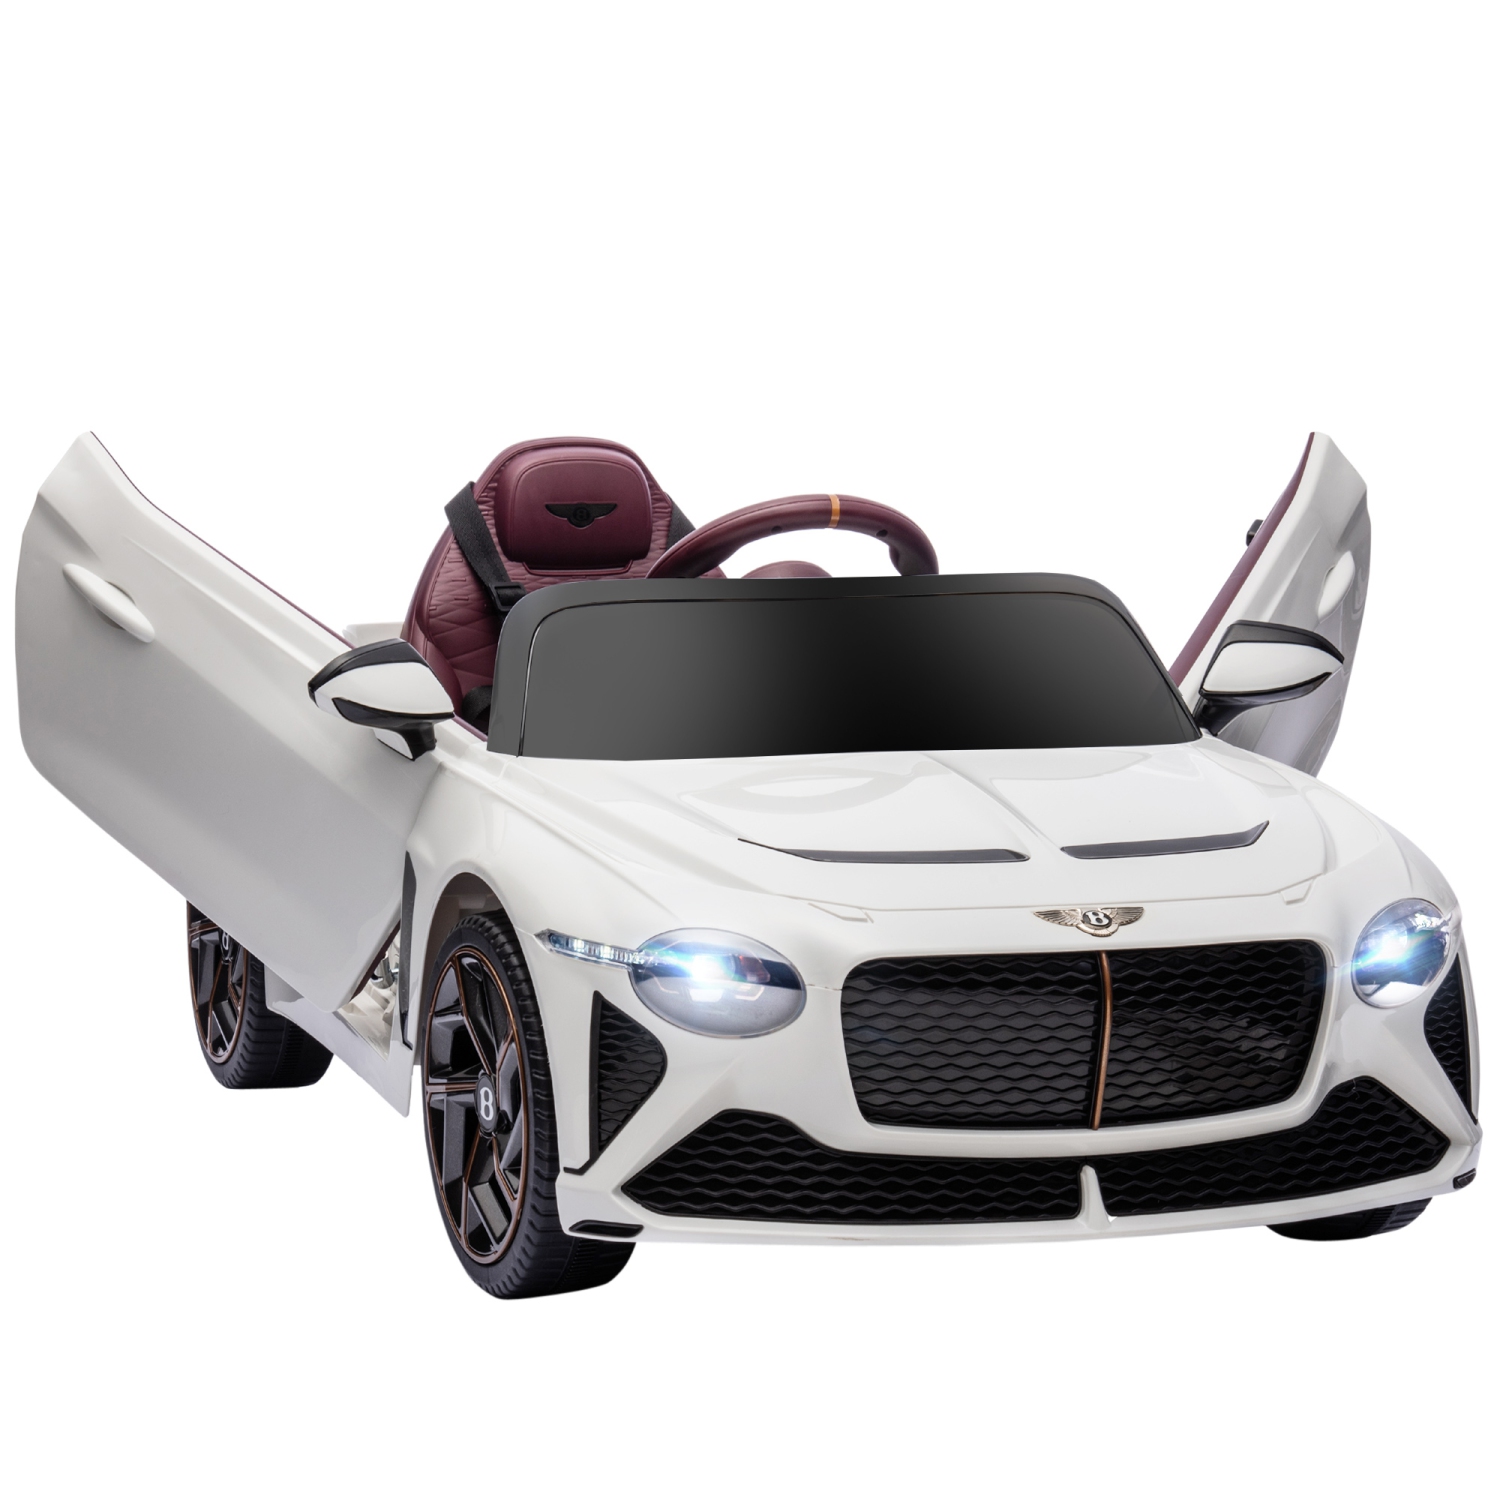 Aosom 12V Electric Ride on Car with Butterfly Doors, 3.1 MPH Kids Ride-on Toy for Boys and Girls with Remote Control, Suspension System, Horn Honking, White